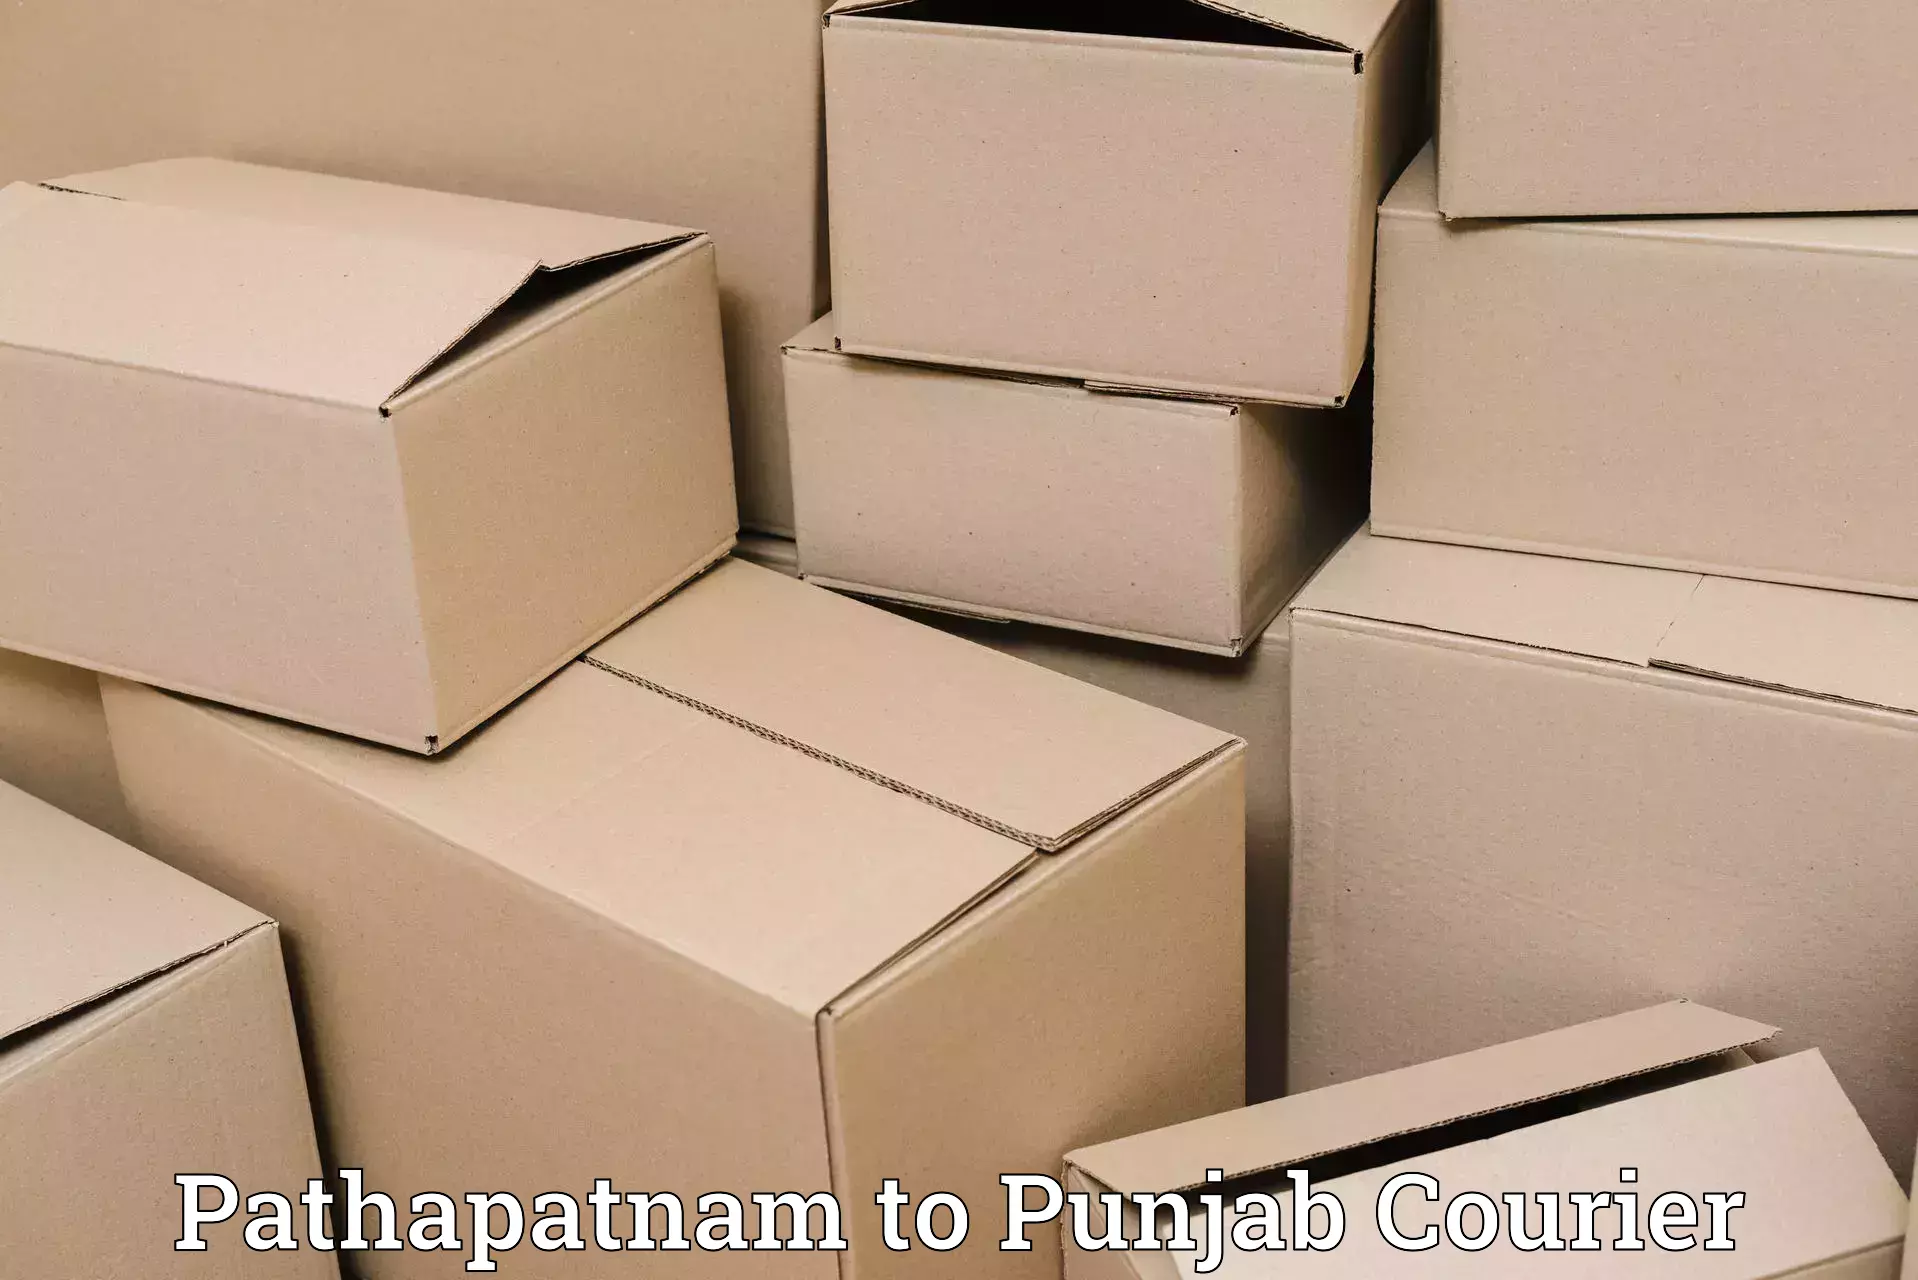 Express delivery capabilities Pathapatnam to Anandpur Sahib